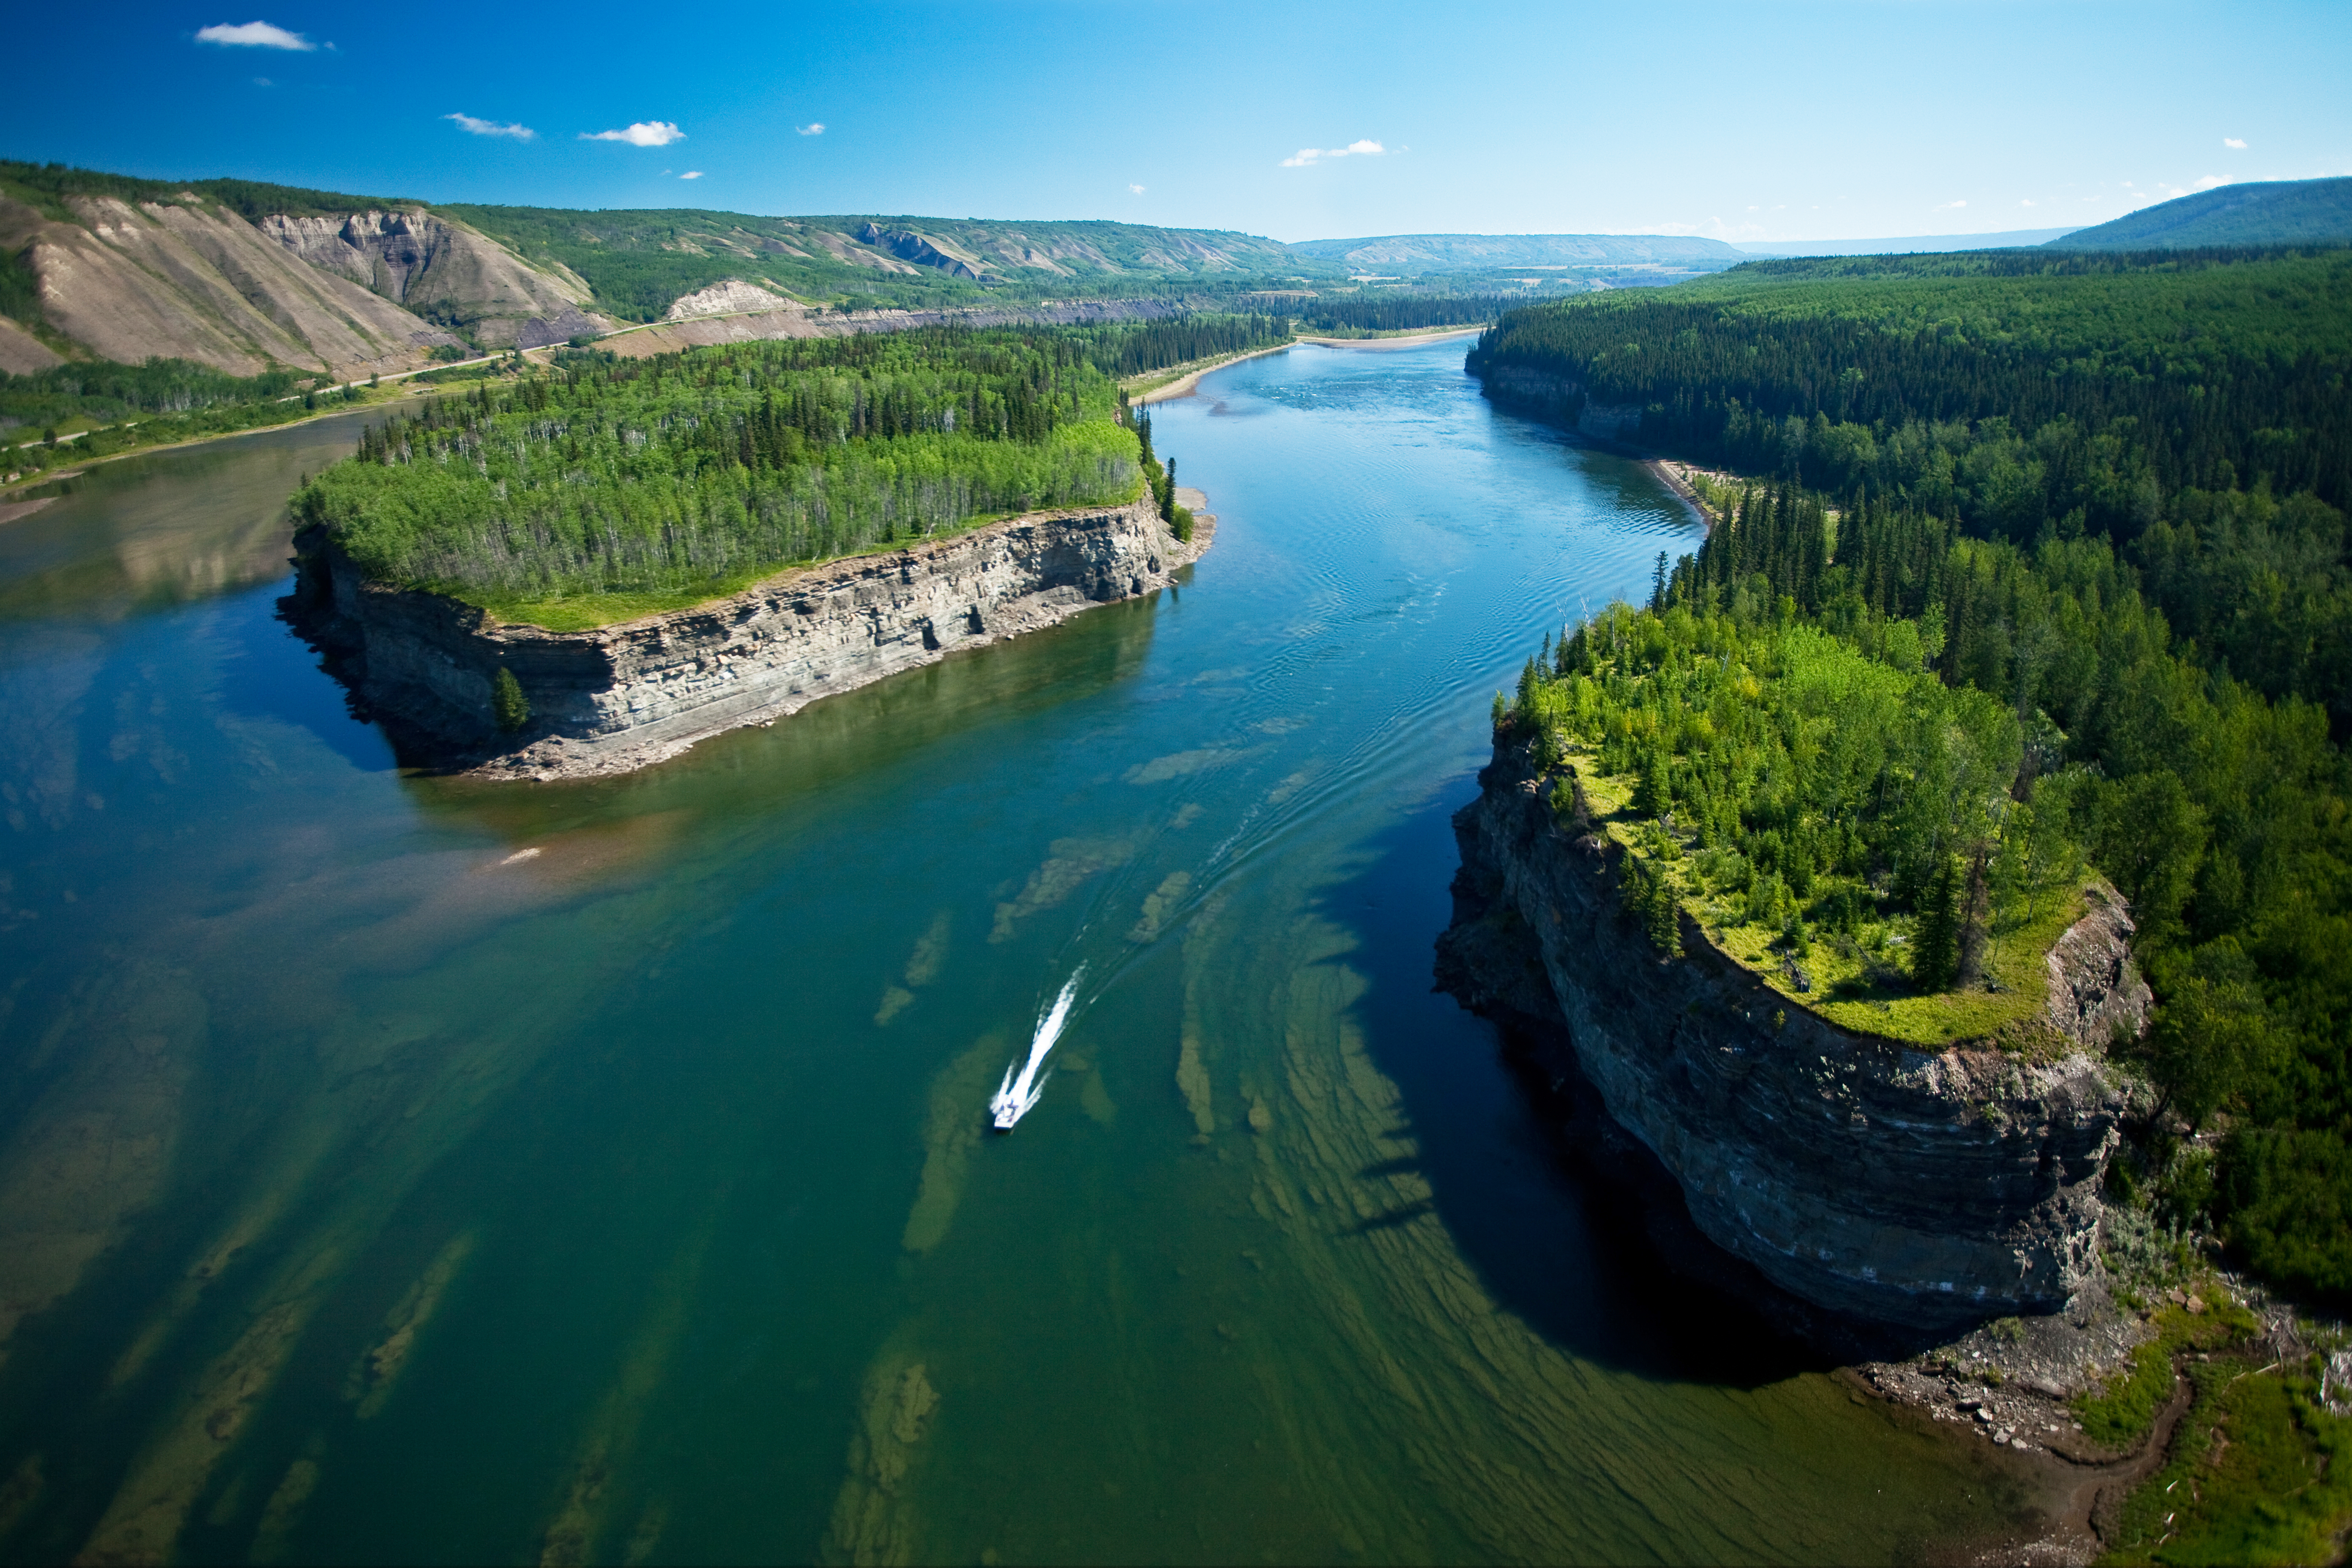 The peace river, with several islands and mountains on either side. End of image description.